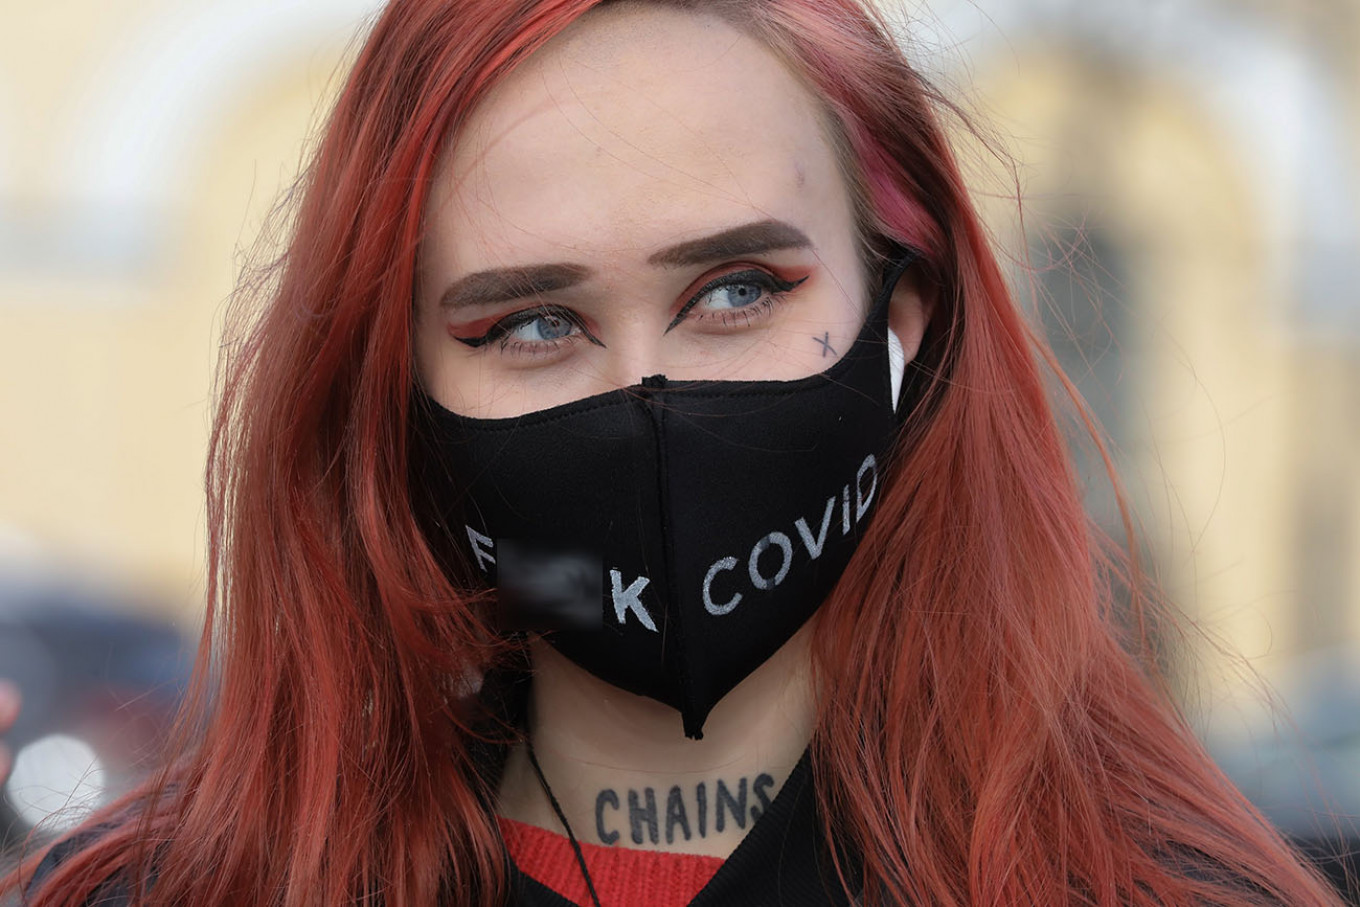 Moscow S Face Mask Fashions Embrace The Funny Weird And Nonsensical The Moscow Times